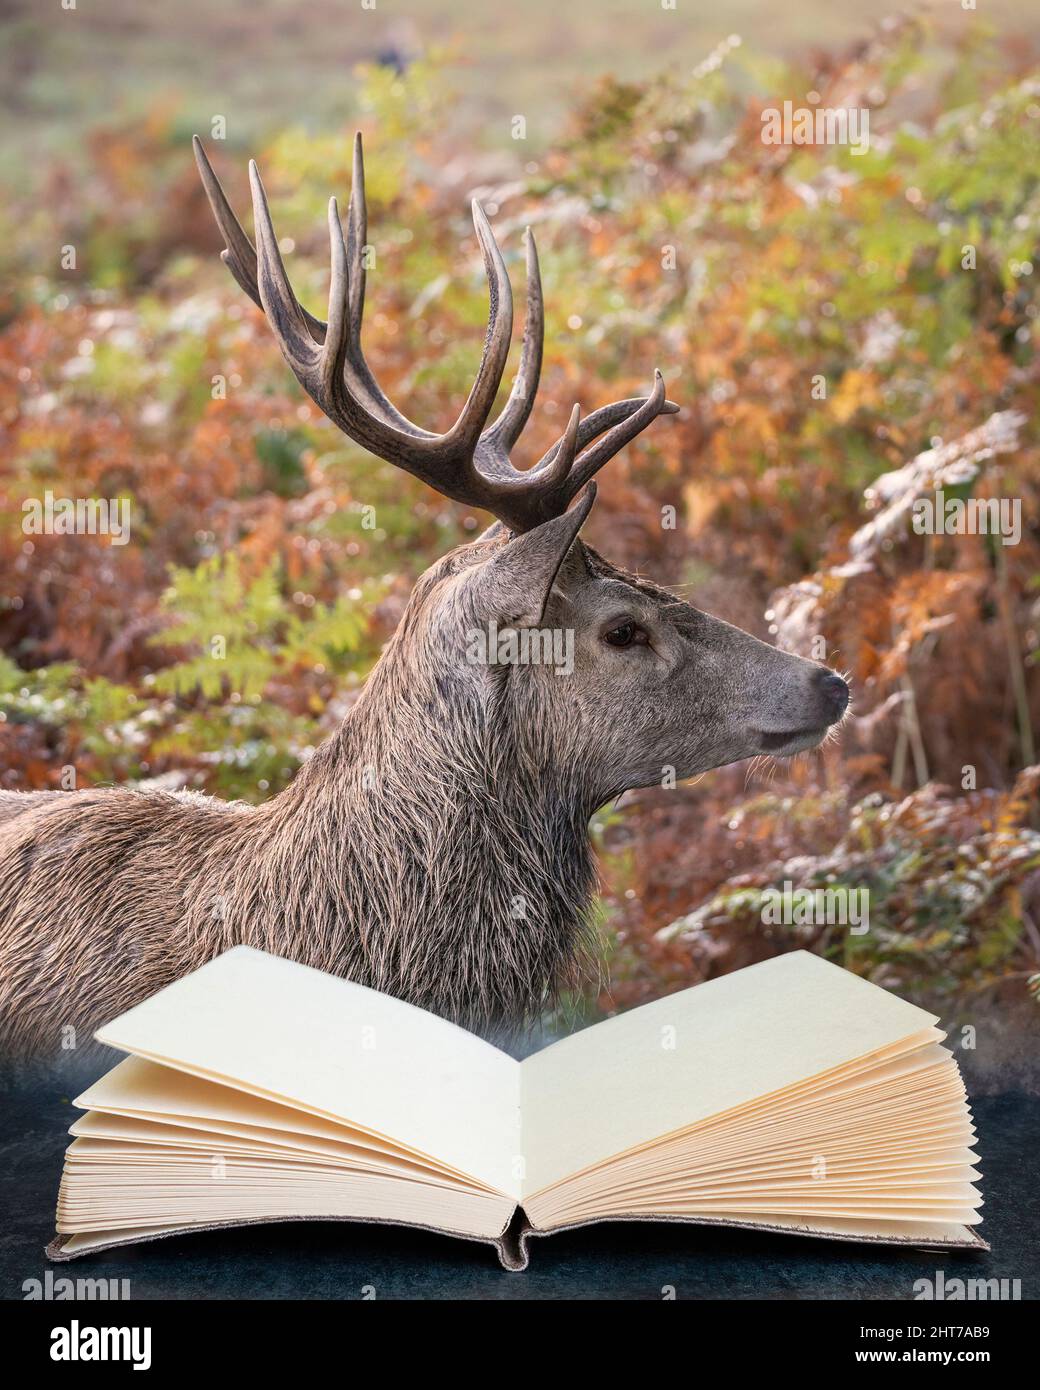 Digital composite image of Beautiful image of red deer stag in colorful Autumn Fall landscape forest coming out of pages in reading book Stock Photo